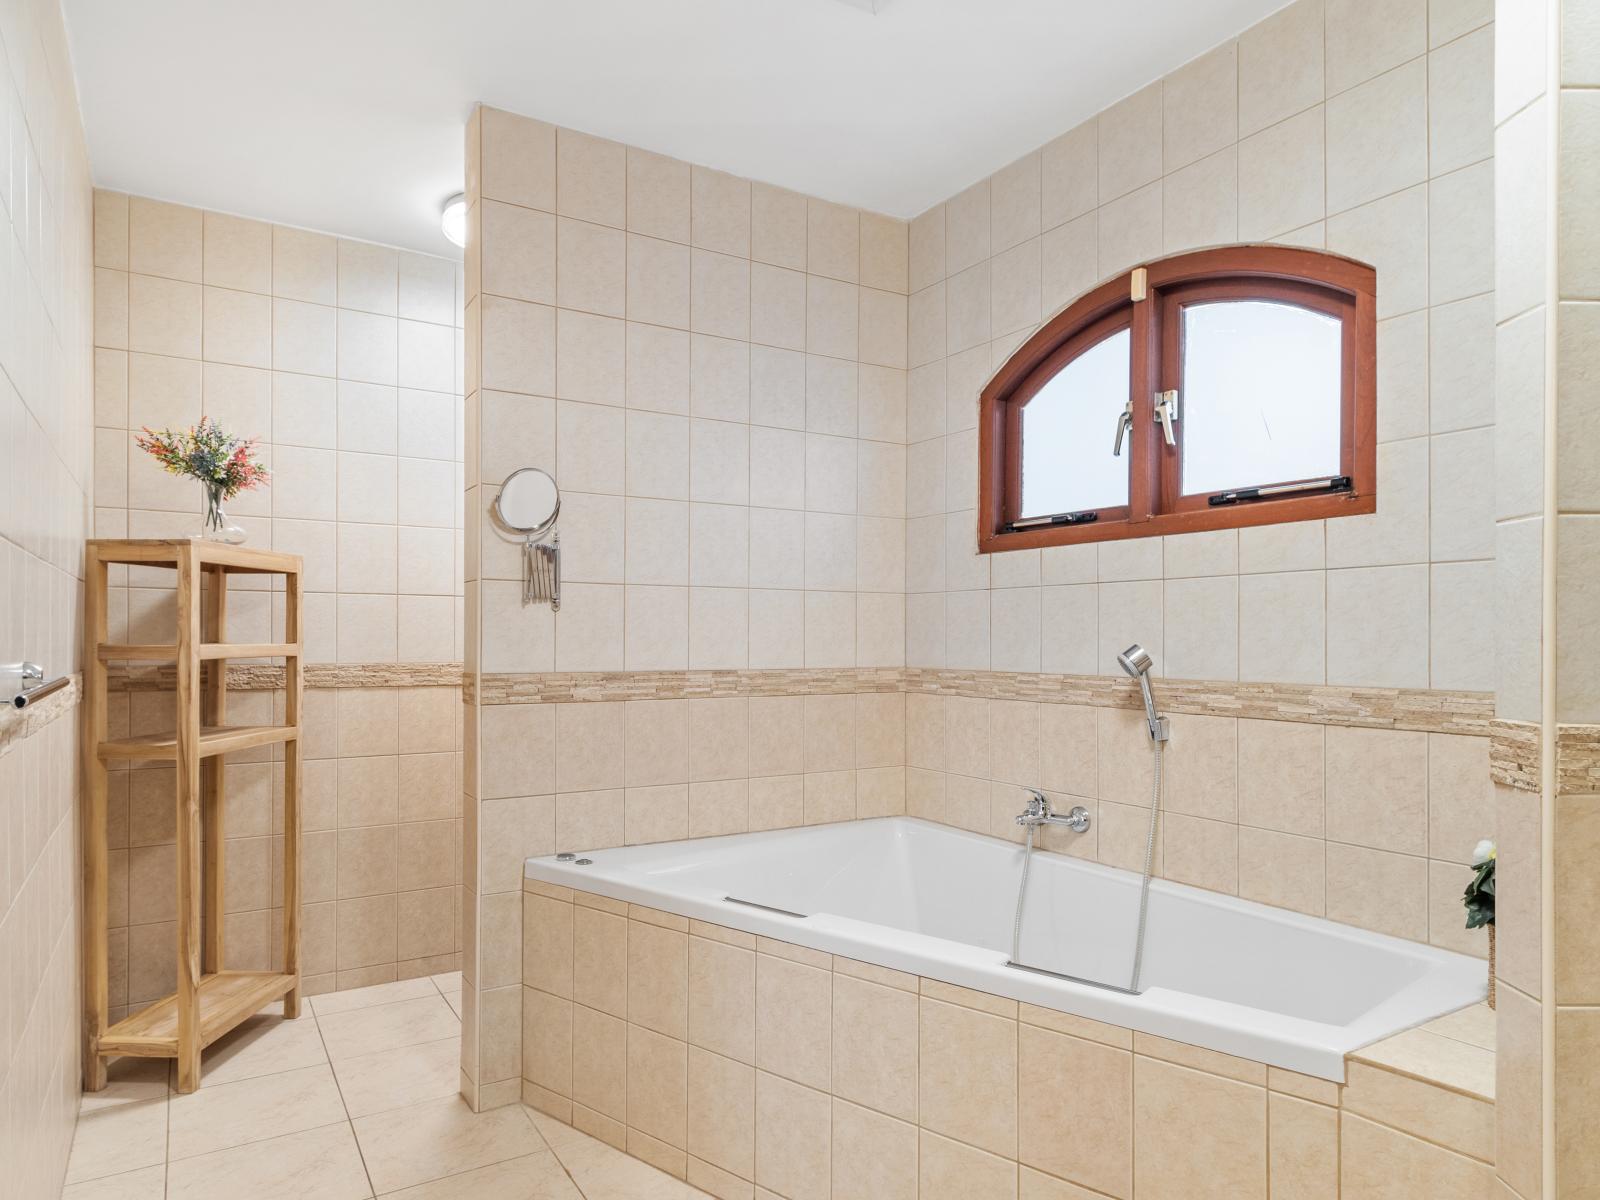 Bathroom 1 features a jetted tub, walk-in shower, and double vanity for added comfort and convenience.